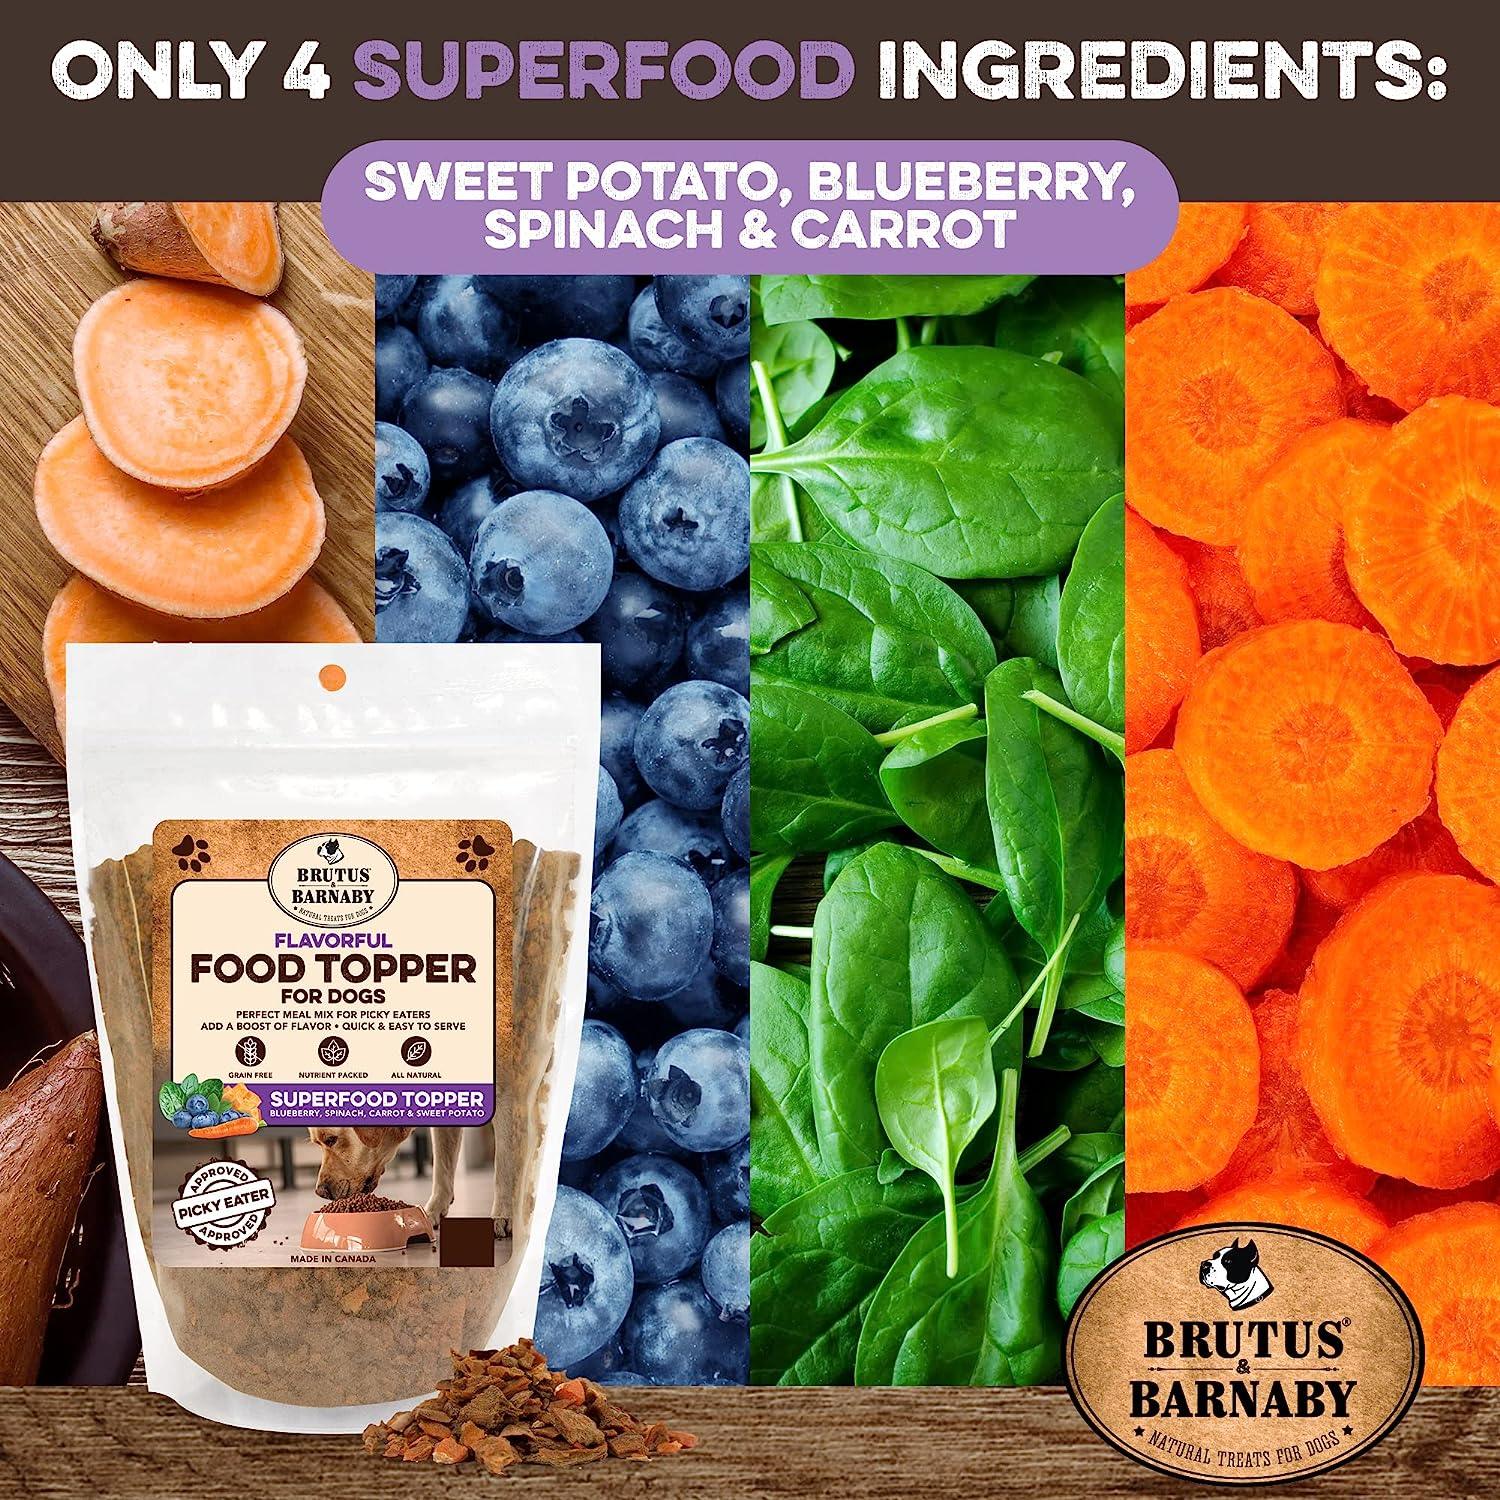 Dog Food Topper - Superfood - Perfect Vegan Meal Enhancer For Bored Or Picky Eaters - Brutus & Barnaby